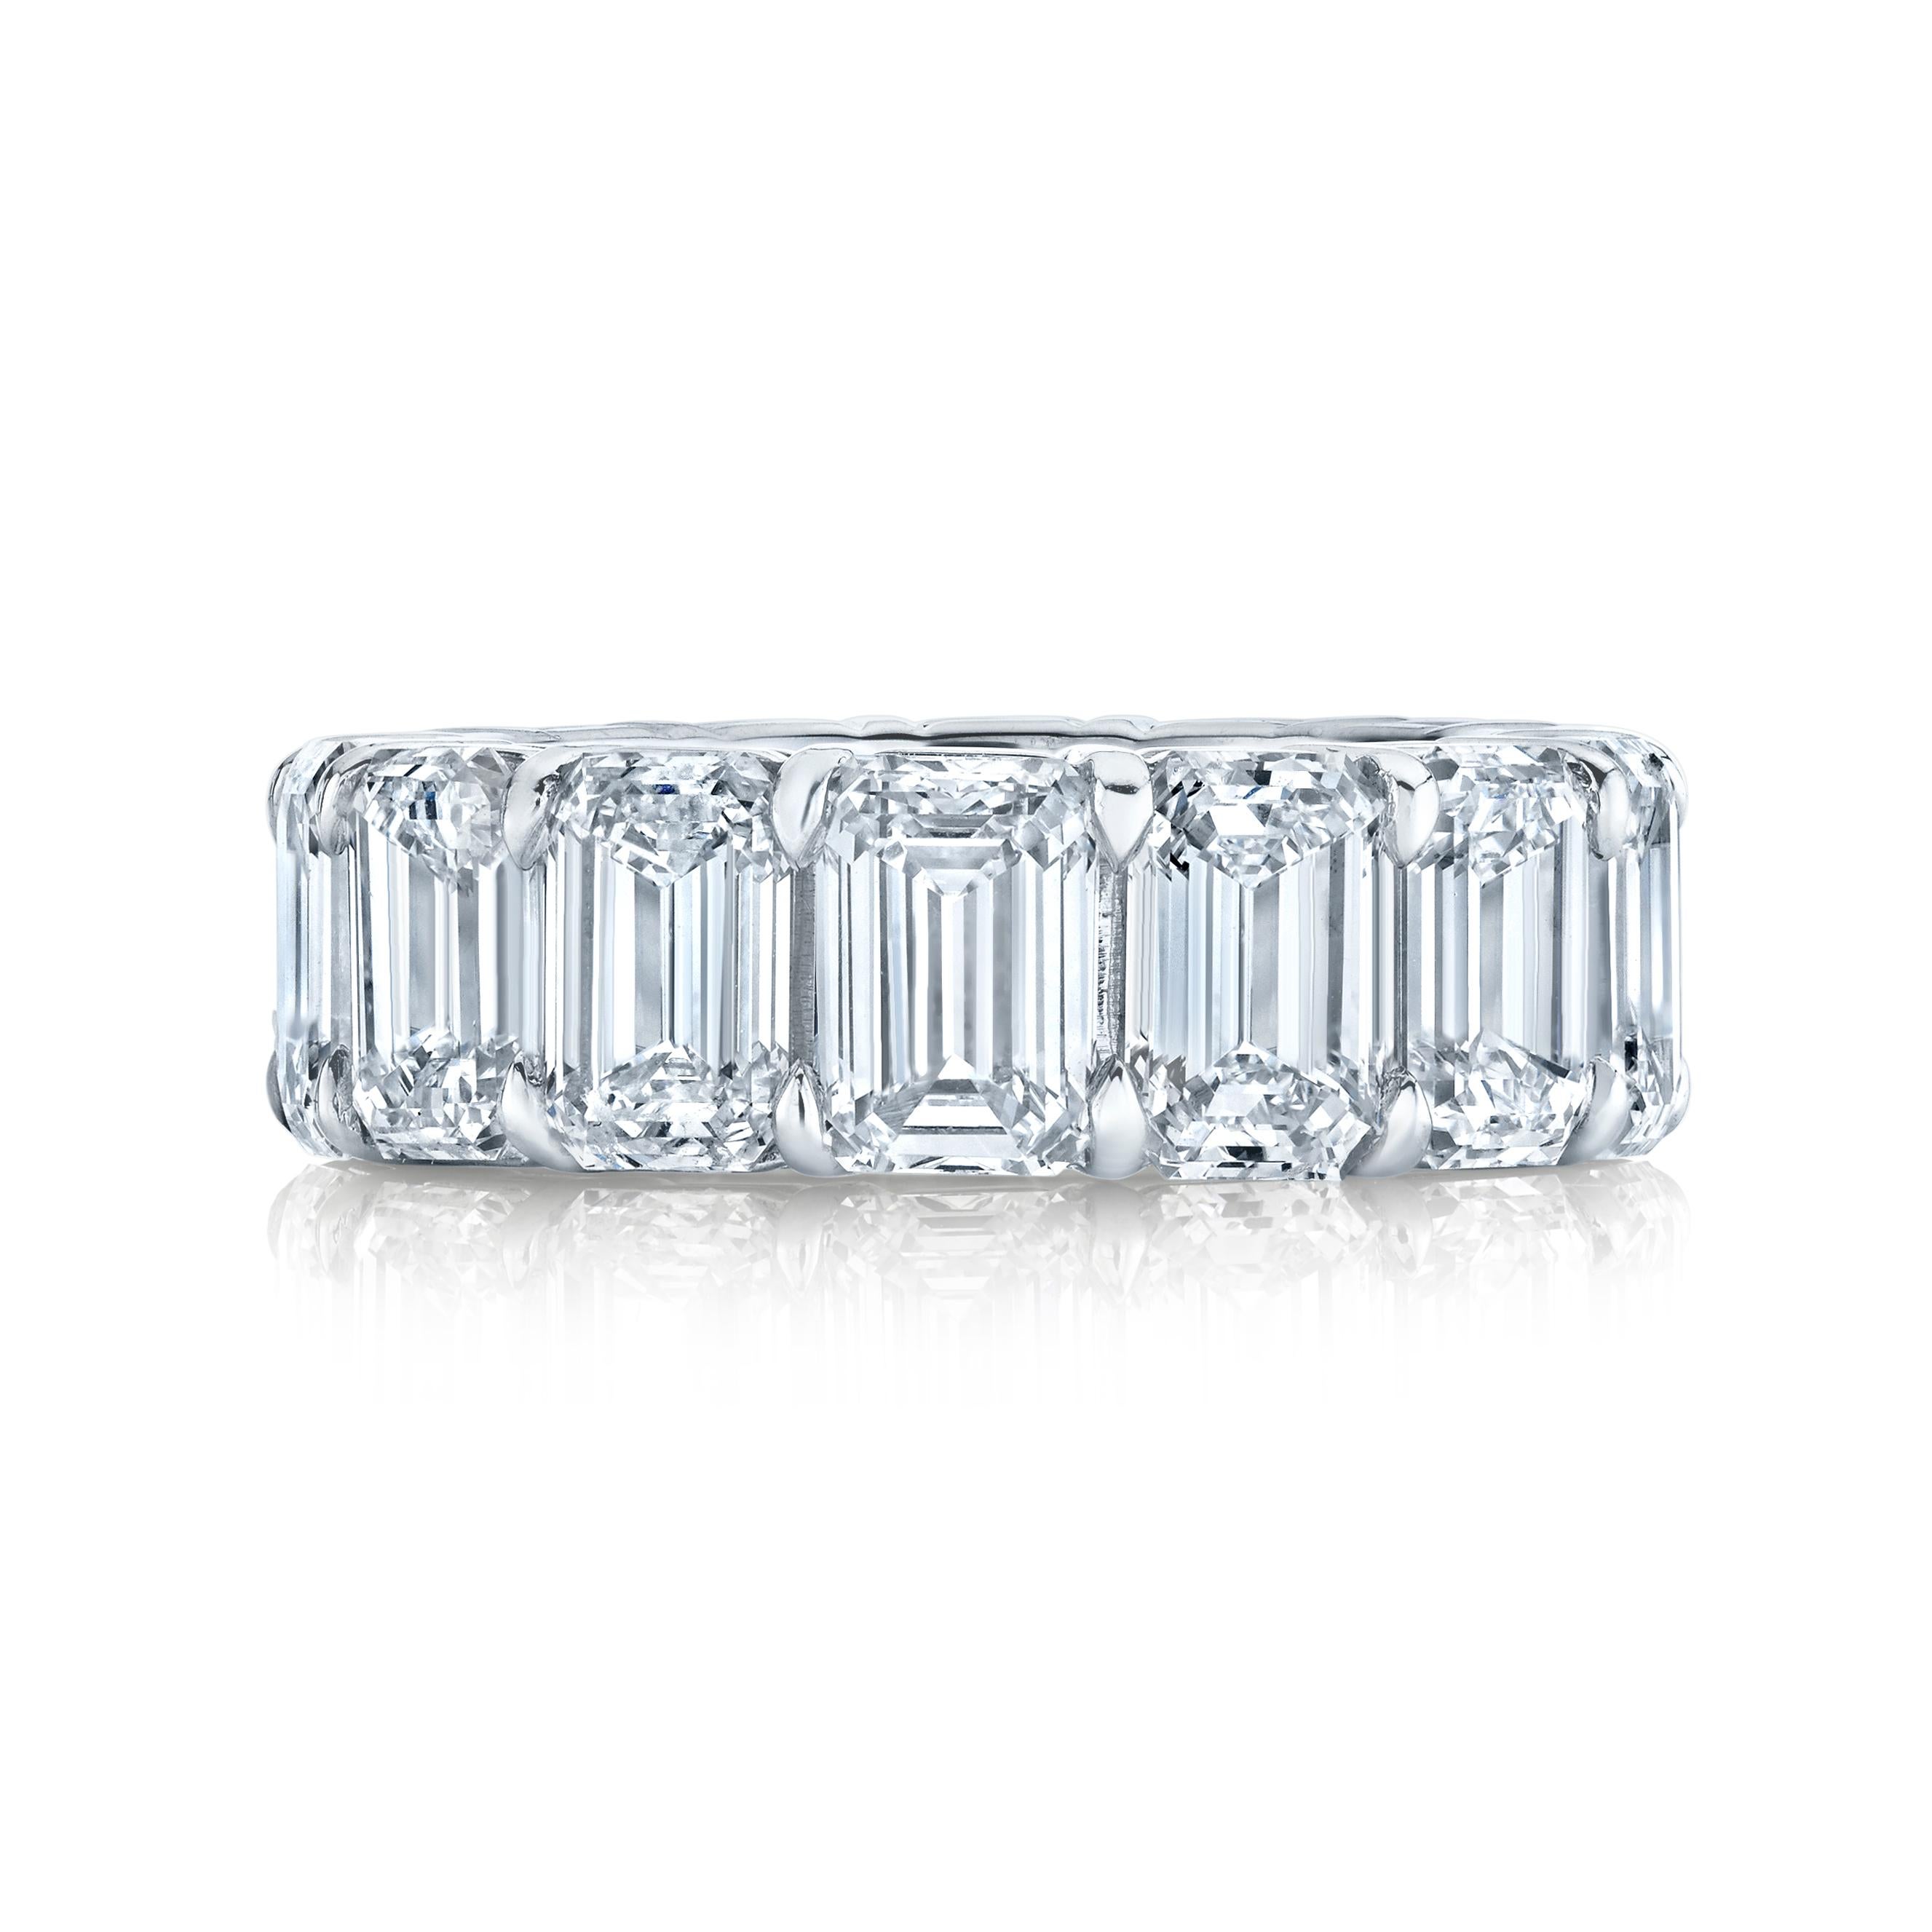 15 Emerald Cut Diamonds set in a platinum mounting.
13.79 carats total weight
Approximate weight per stone is from 0.92 carats.
Color I-J  Clarity VVS1 - VS2
All stones are certified by GIA.
Ring size 6.50

